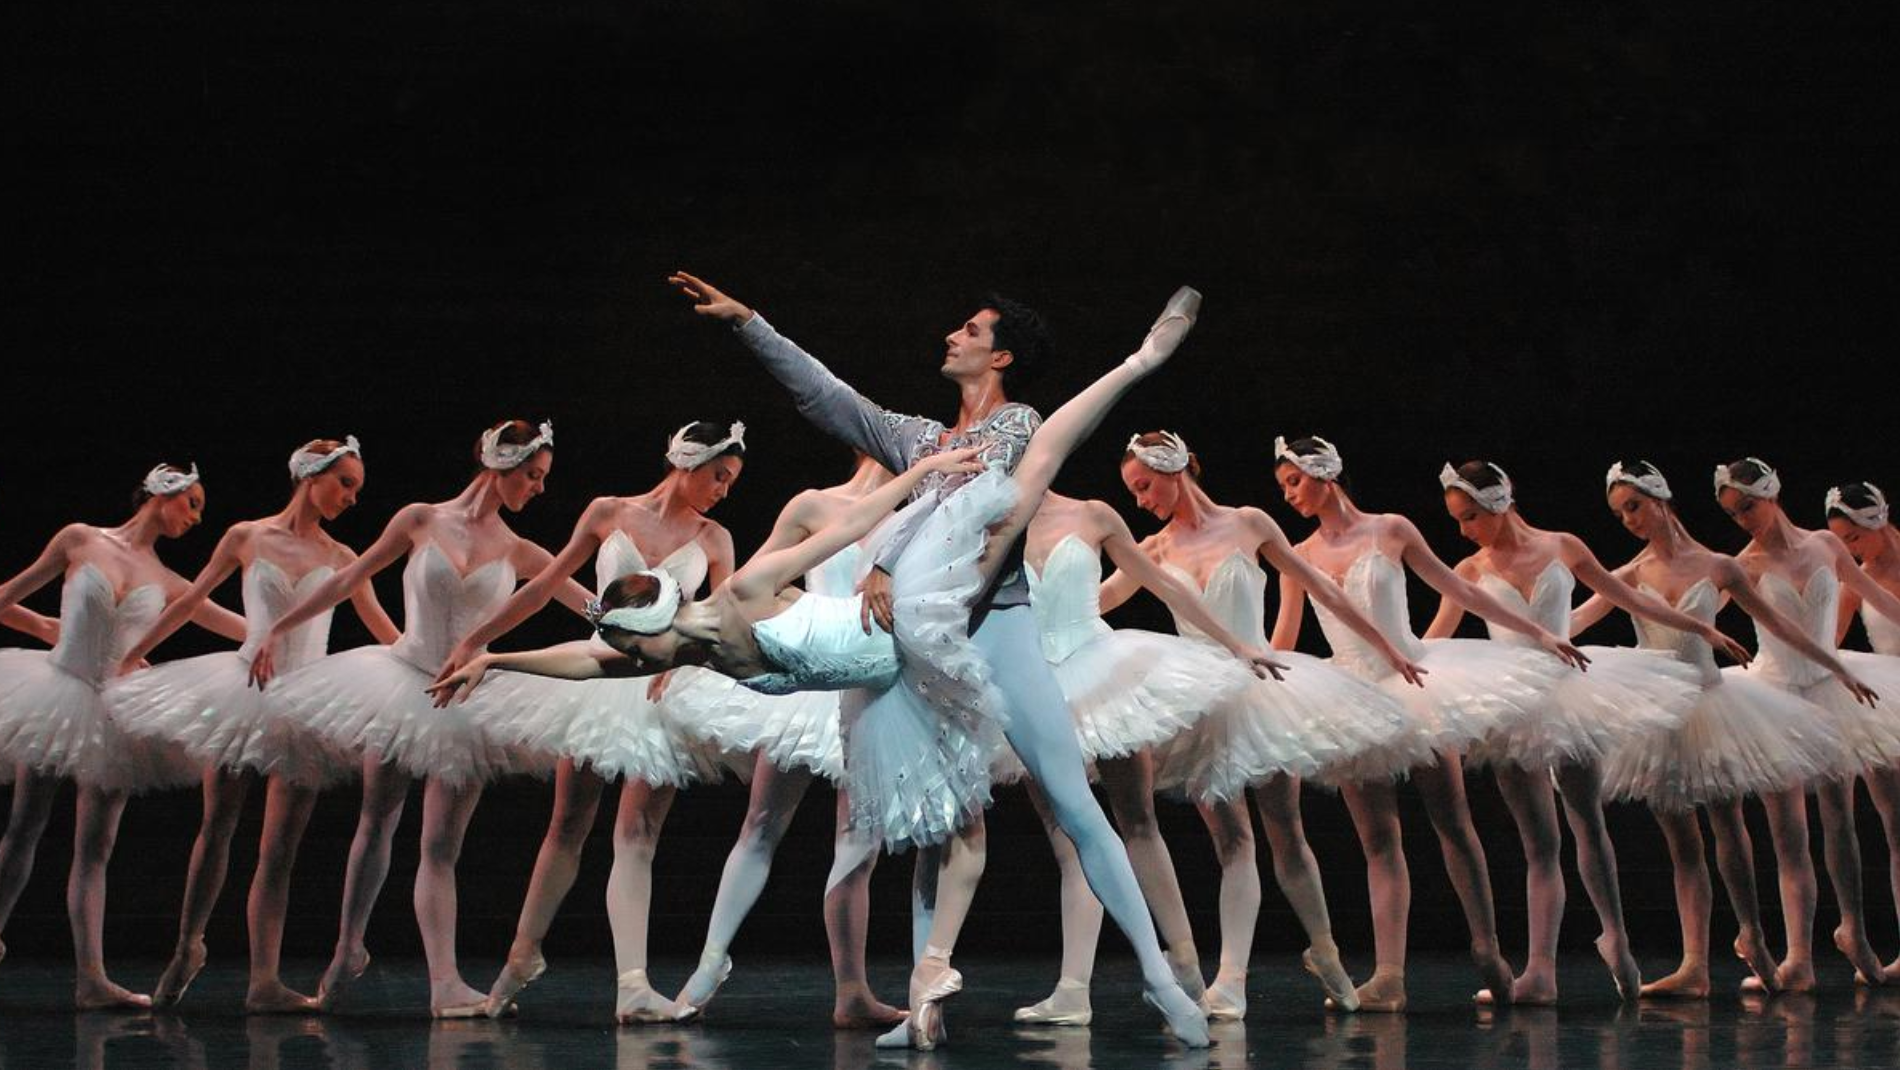 A female ballet dancer dressed in a traditional white Swan Lake costume poses on one leg with her arm outstretched. She is help by a male dancer who is dressed as the prince, he points his right arm out into the air. They stand in front of a row of female dancers who are all dressed in matching white swan lake costumes.